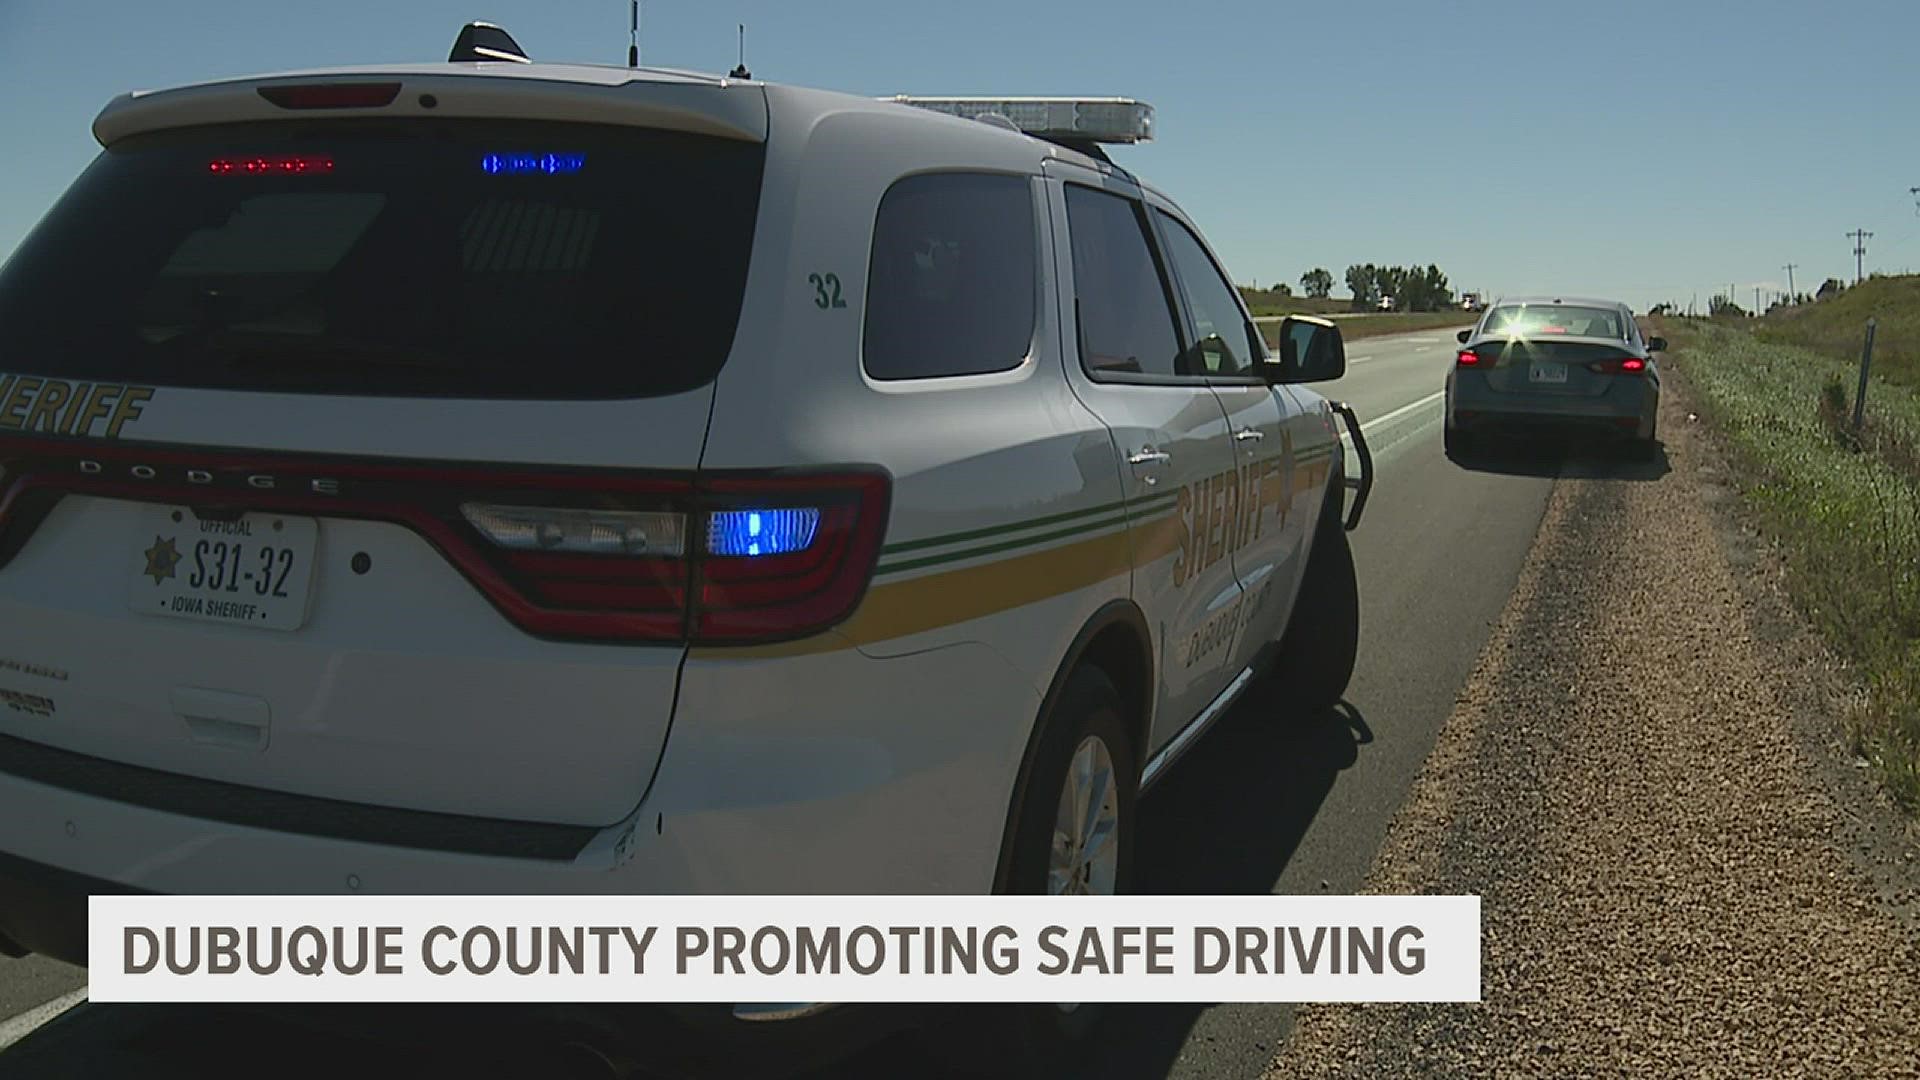 After an increased number of car-related fatalities, Iowa law enforcement agencies are looking to implement new safety measures to make driving safer.